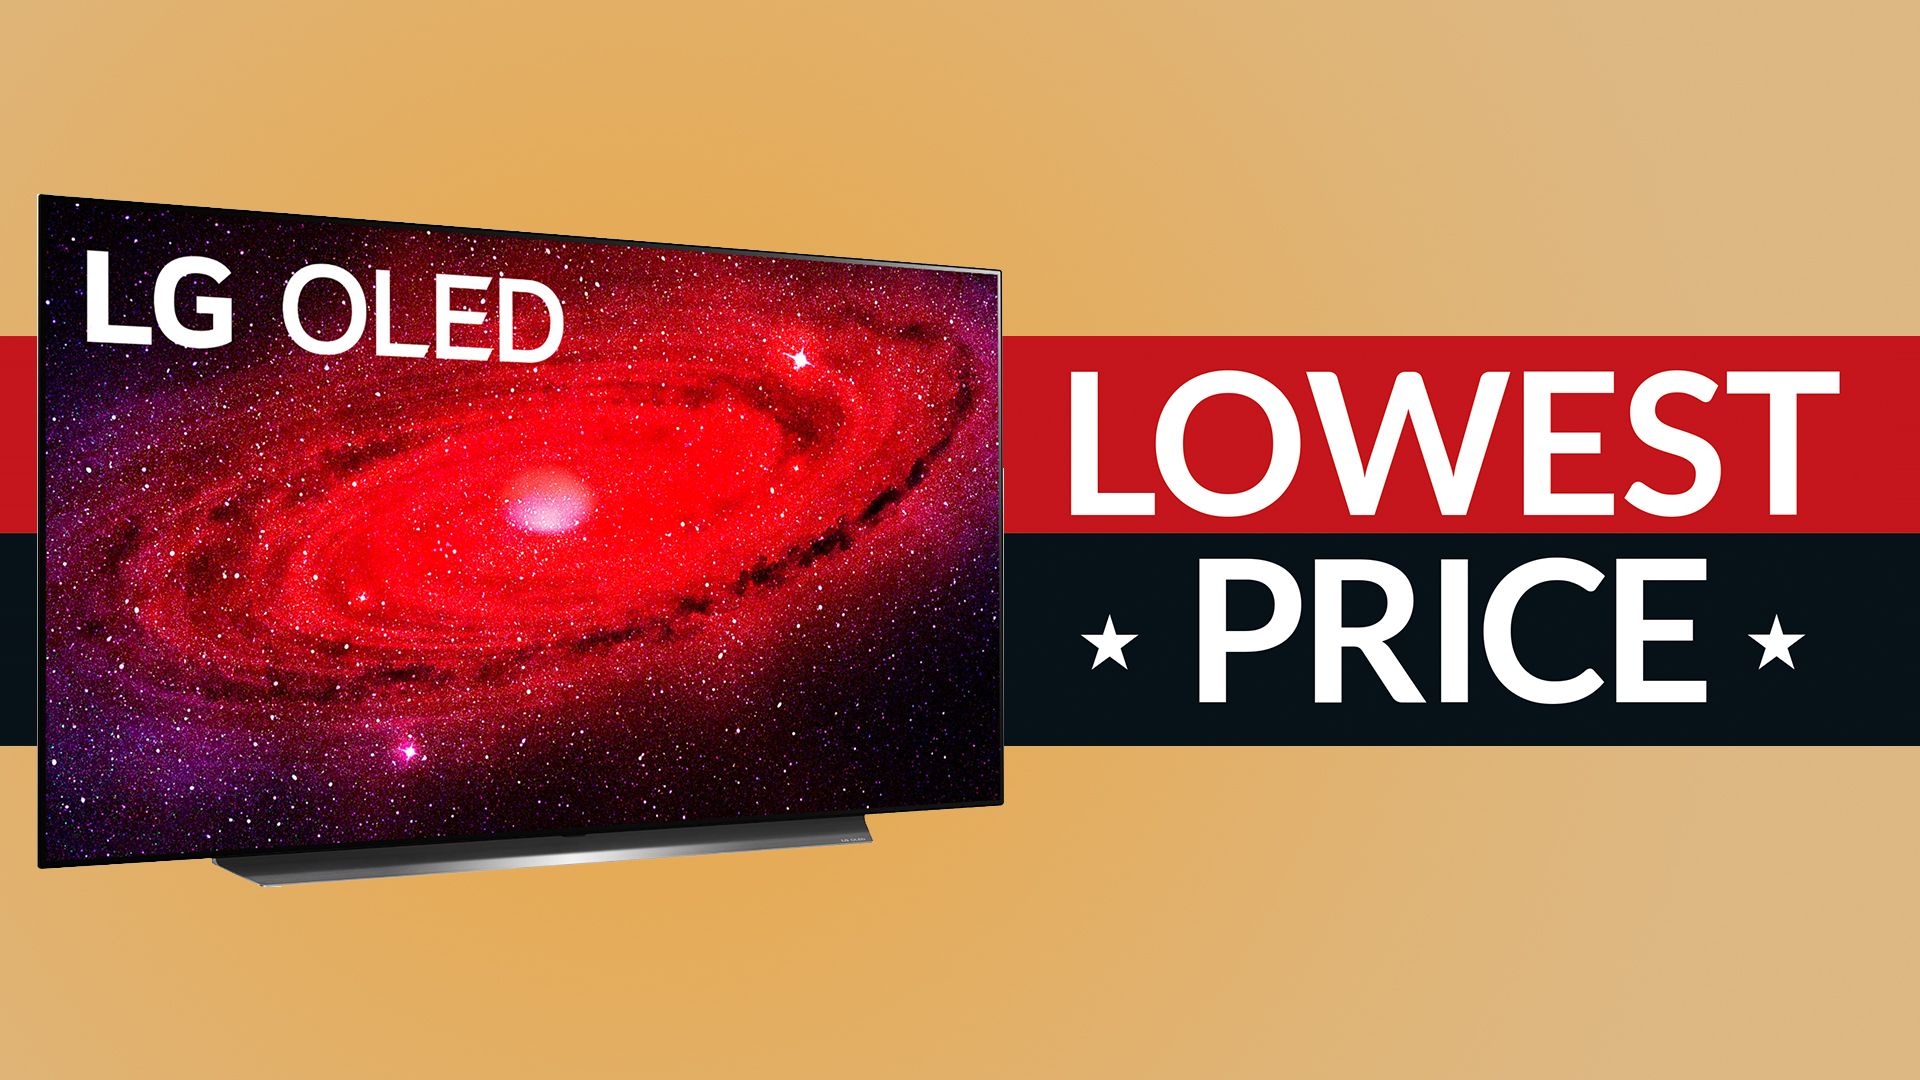 Best Buy Black Friday OLED TV deals are here! Save on LG, Sony & Vizio